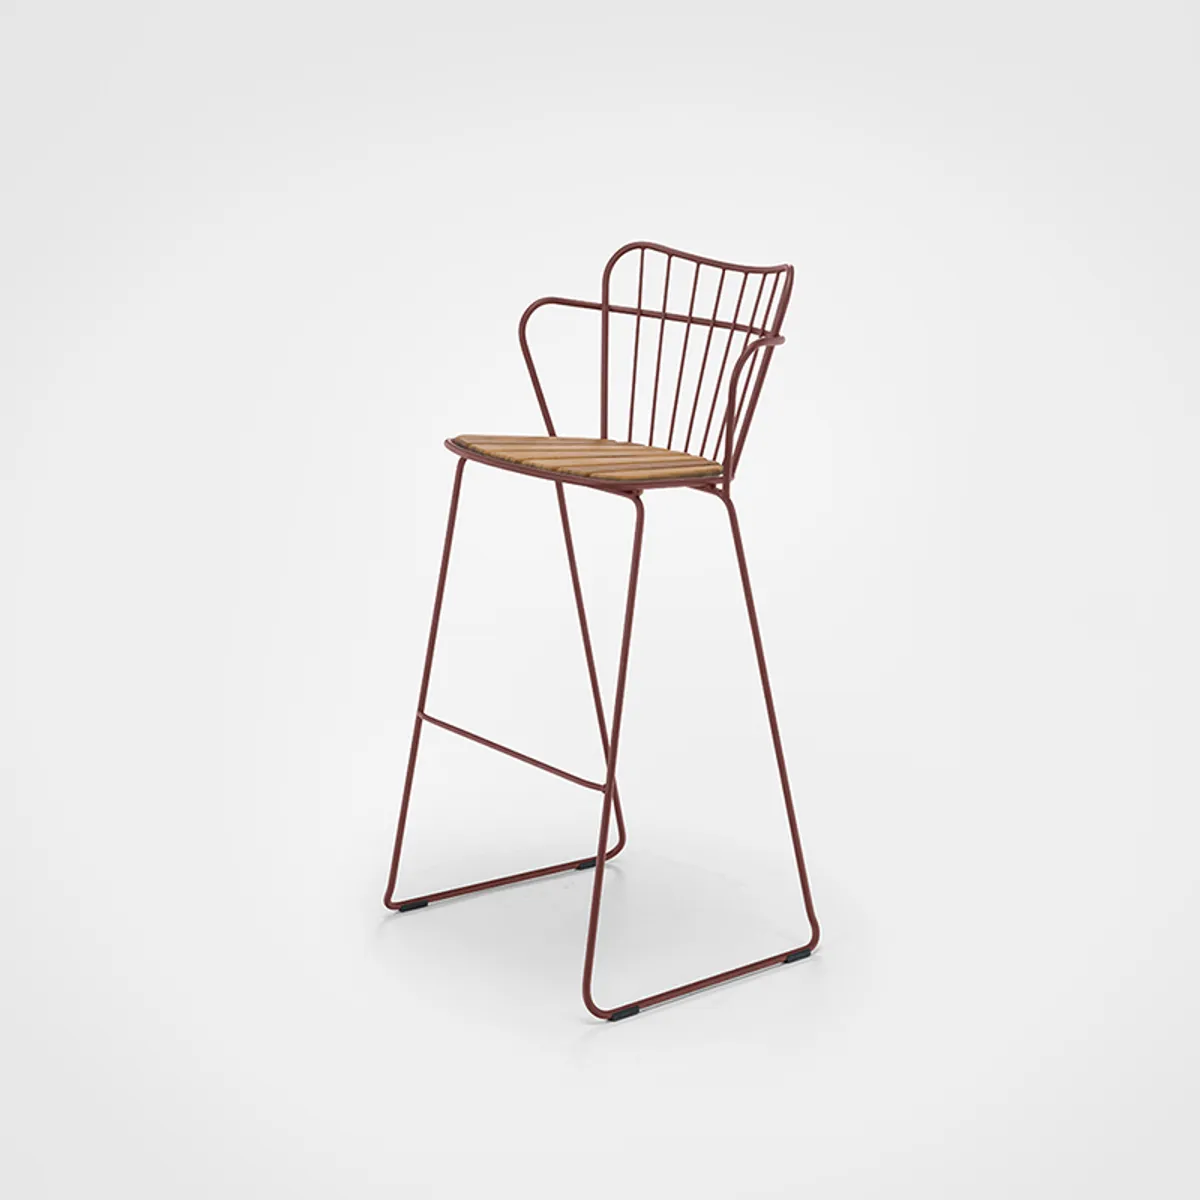 Plumage Bar Stool In Red Metal With Bamboo Seat Outdoor Furniture For Bars